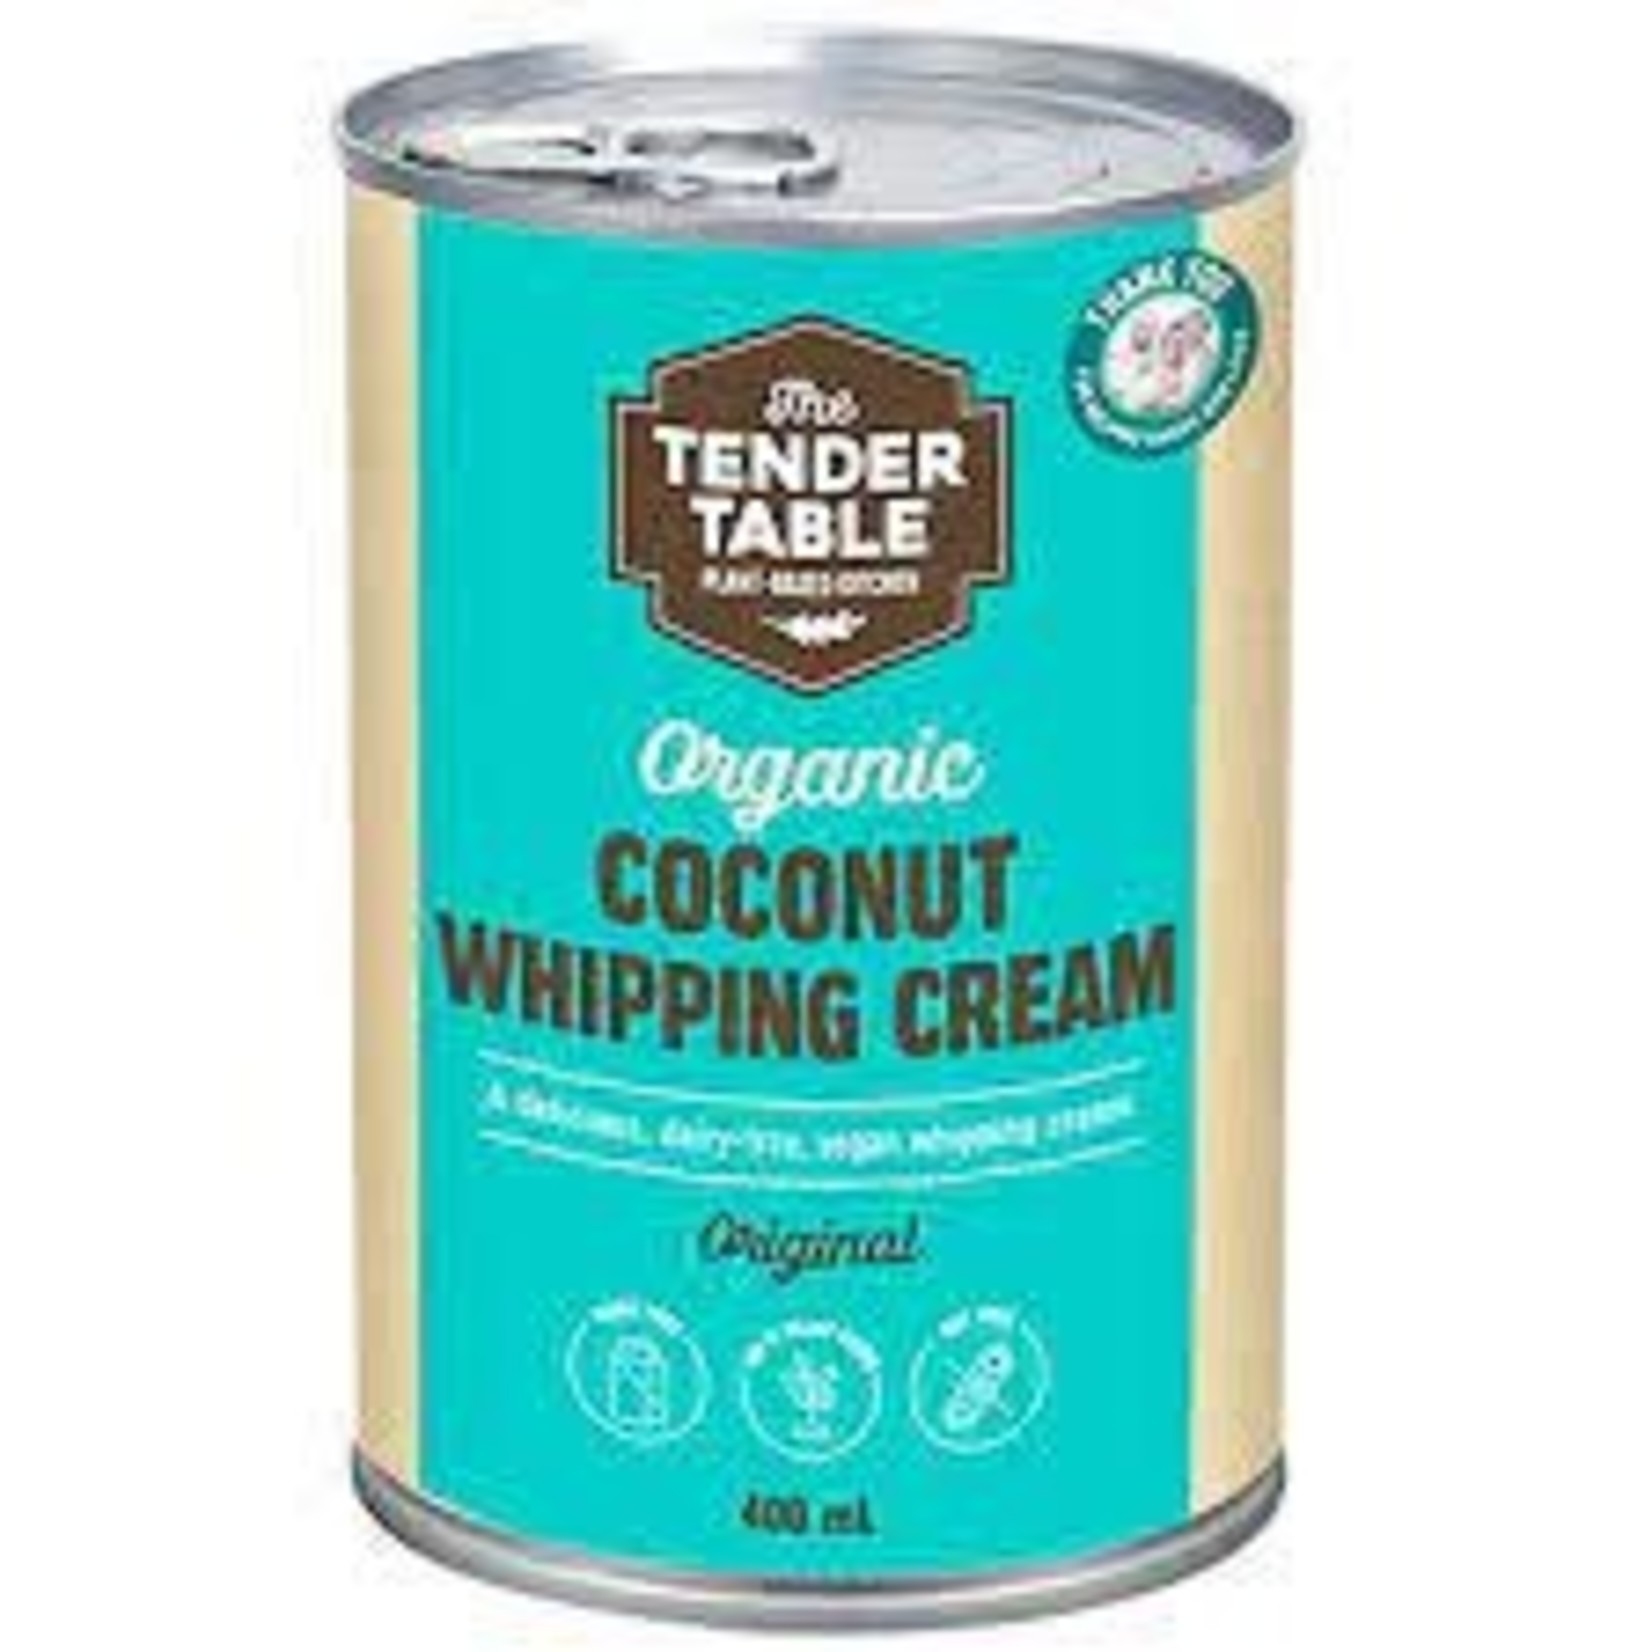 The tender table The Tender Table  Organic Coconut Whipping Cream Original 400ml